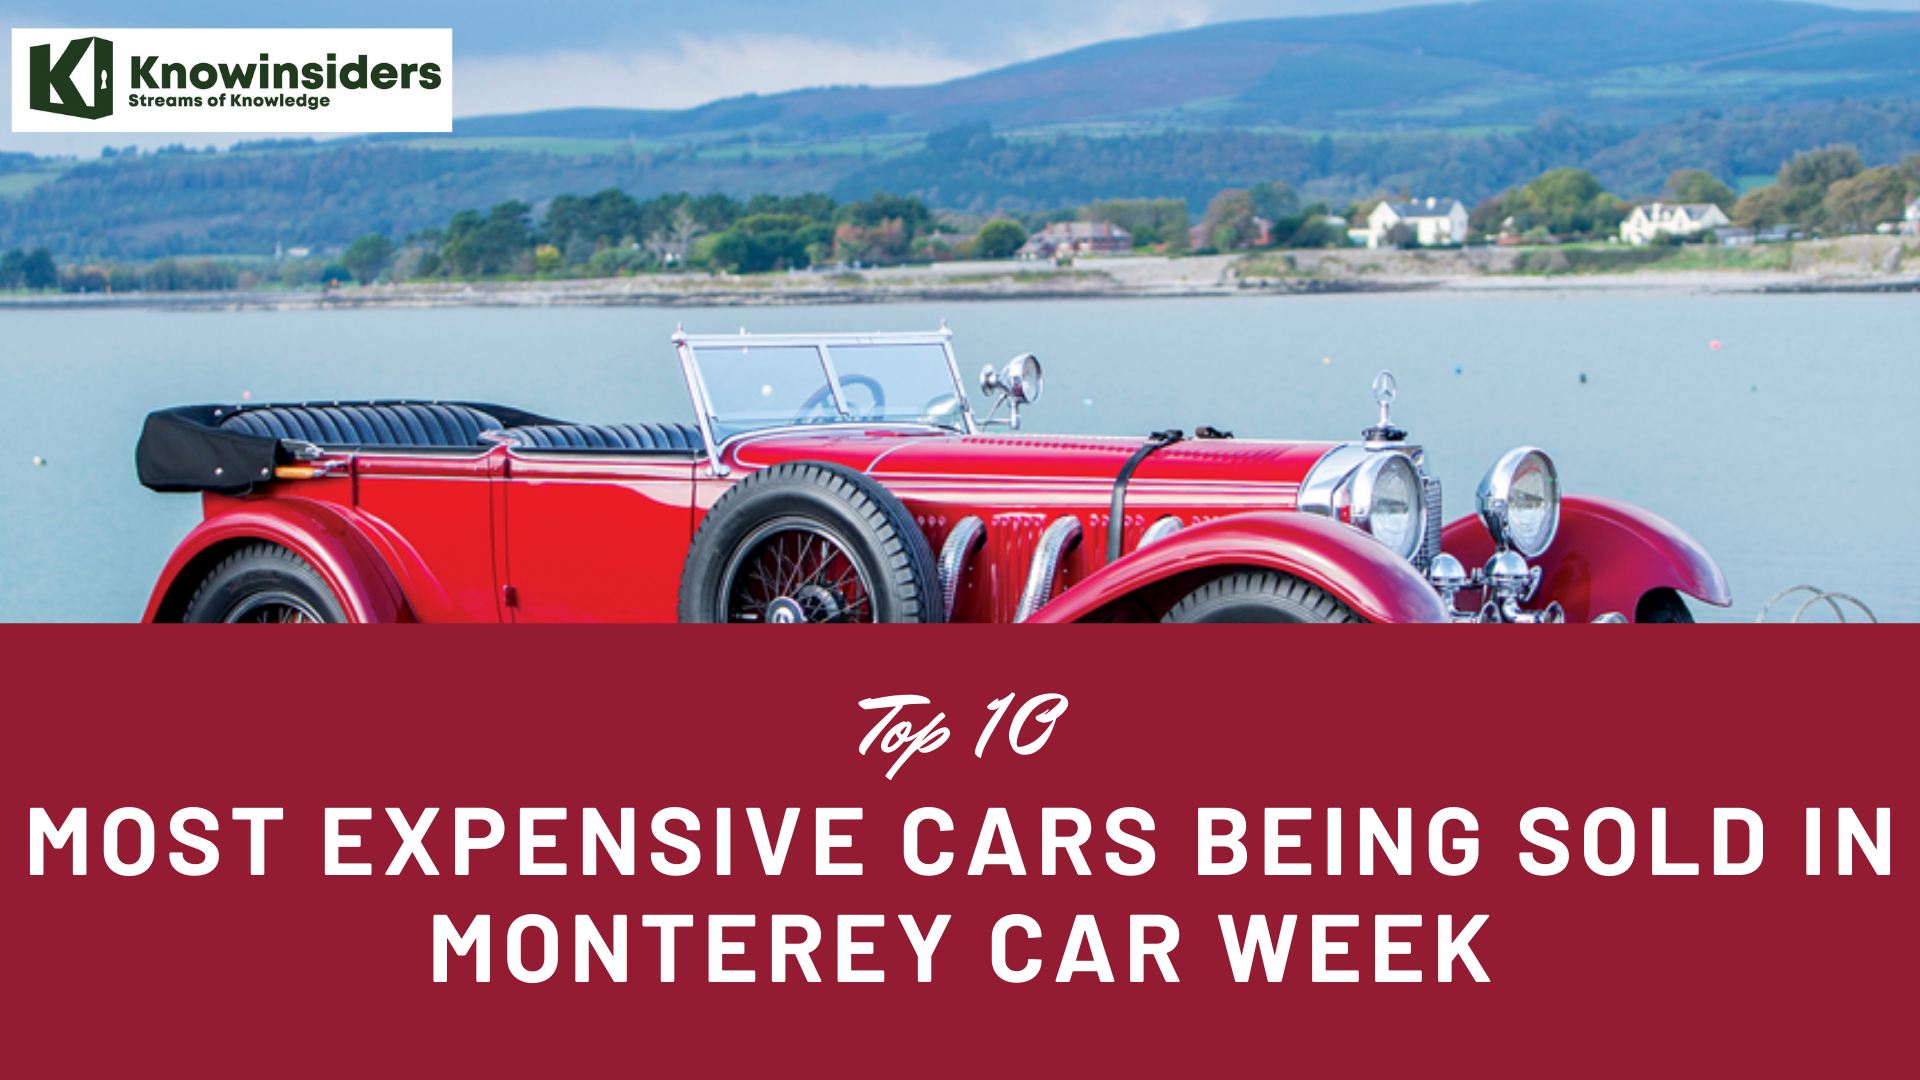 Top 10 Most Expensive Cars Being Sold in Auction